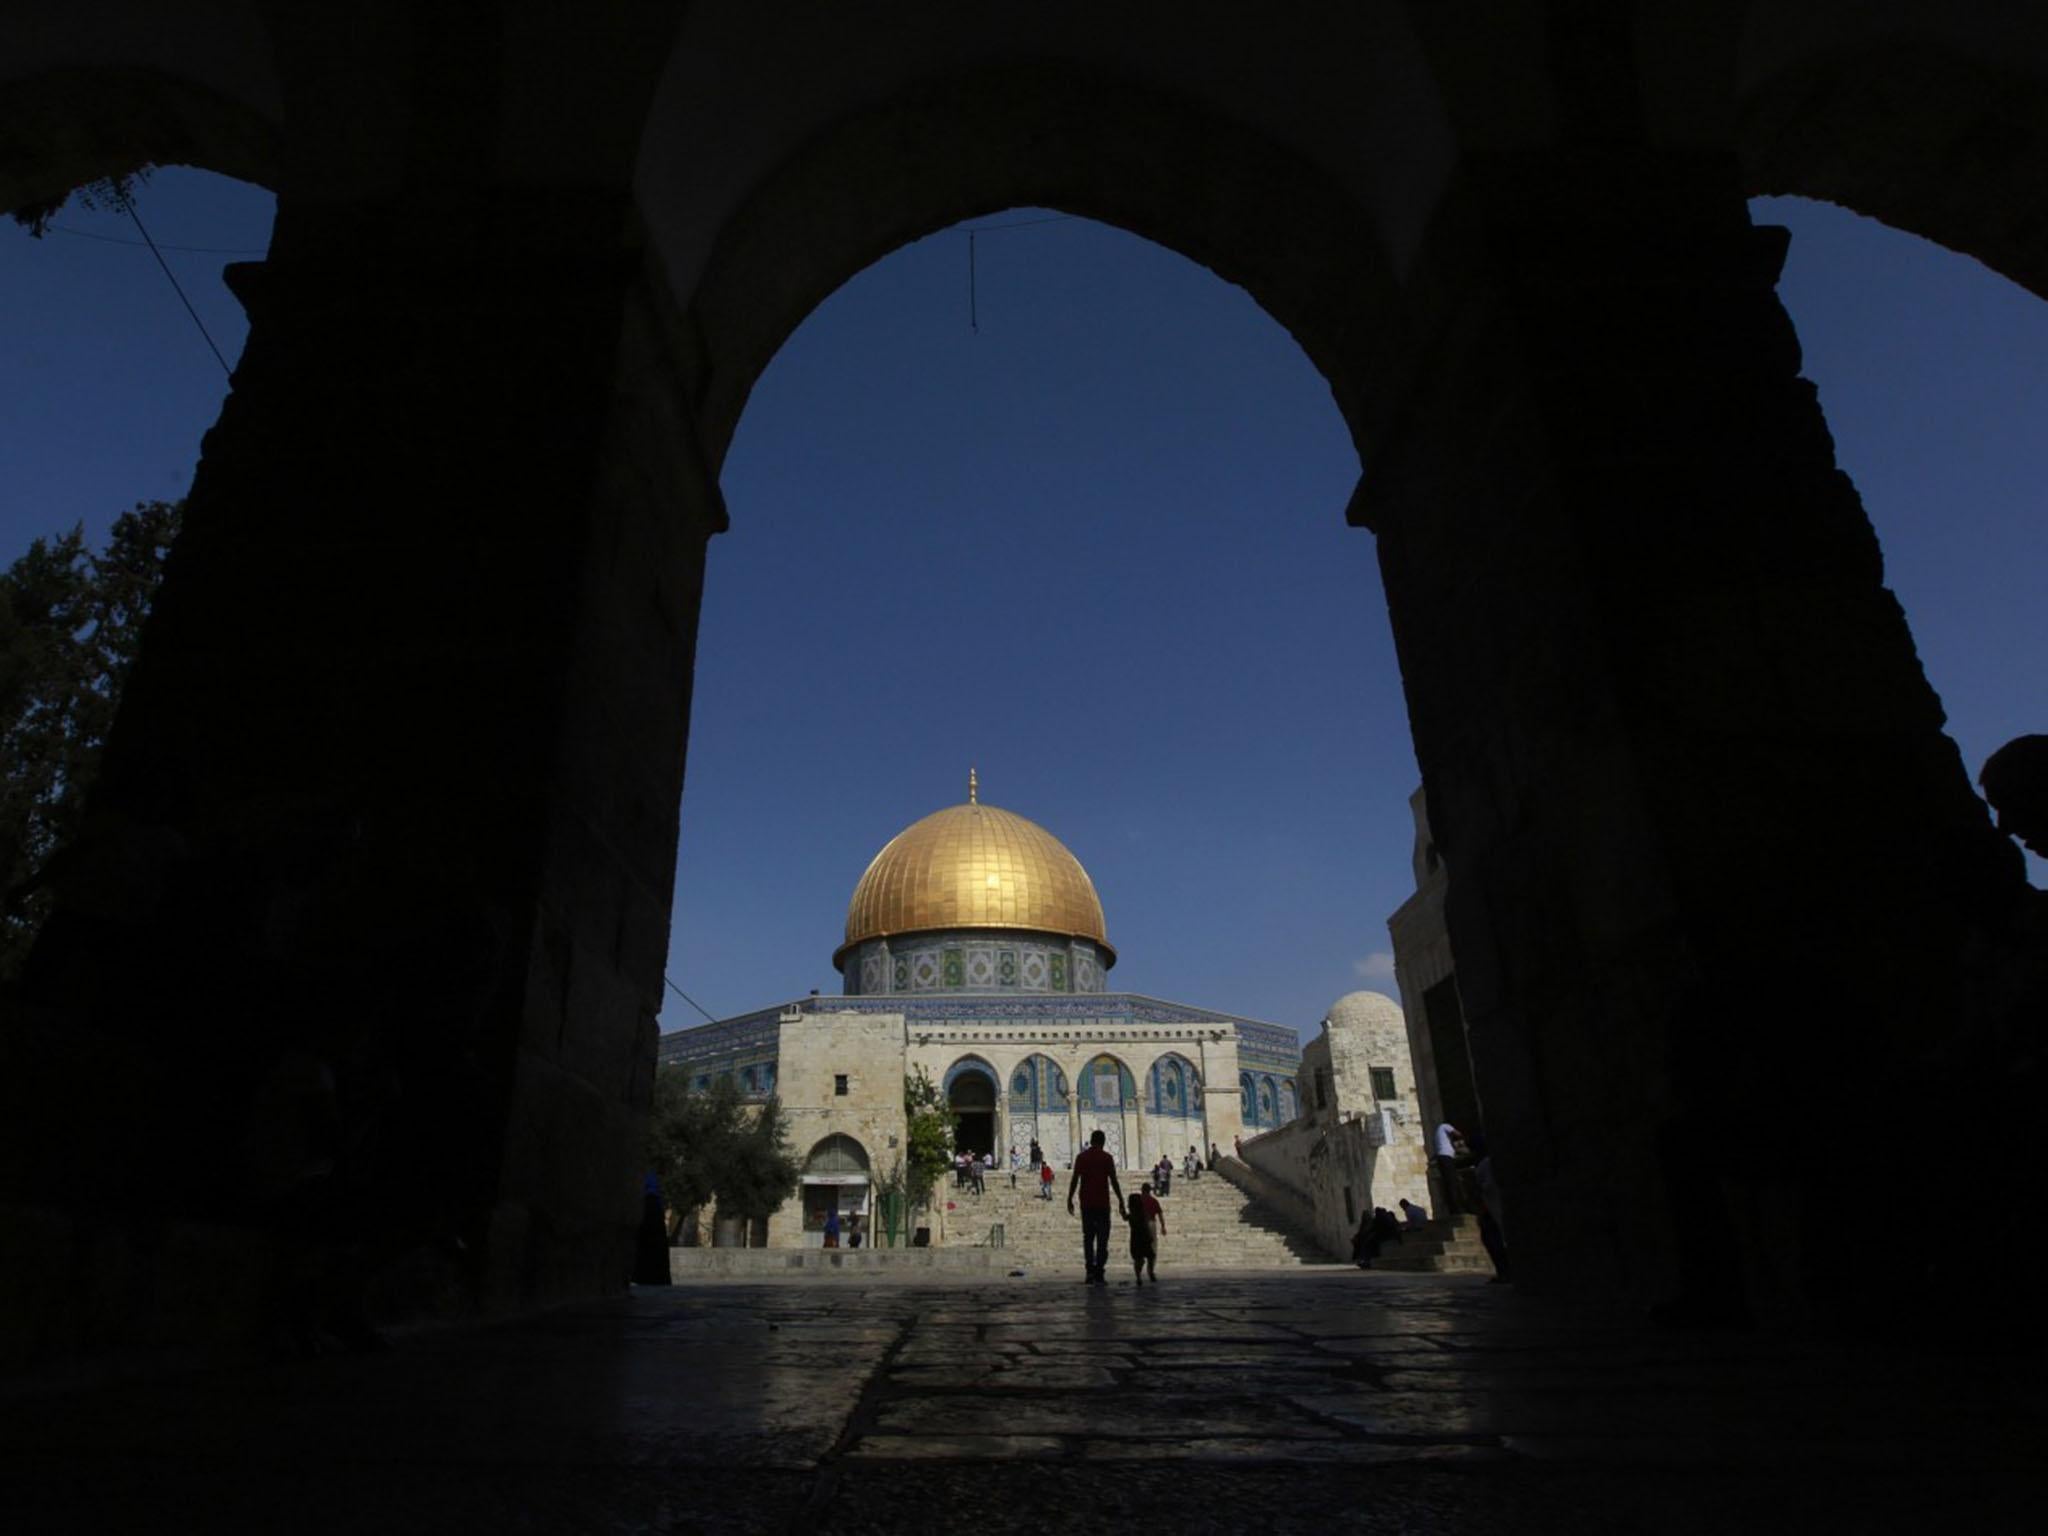 Palestinians make their way to pray in the Dome of the Rock on Temple Mount in Jerusalem